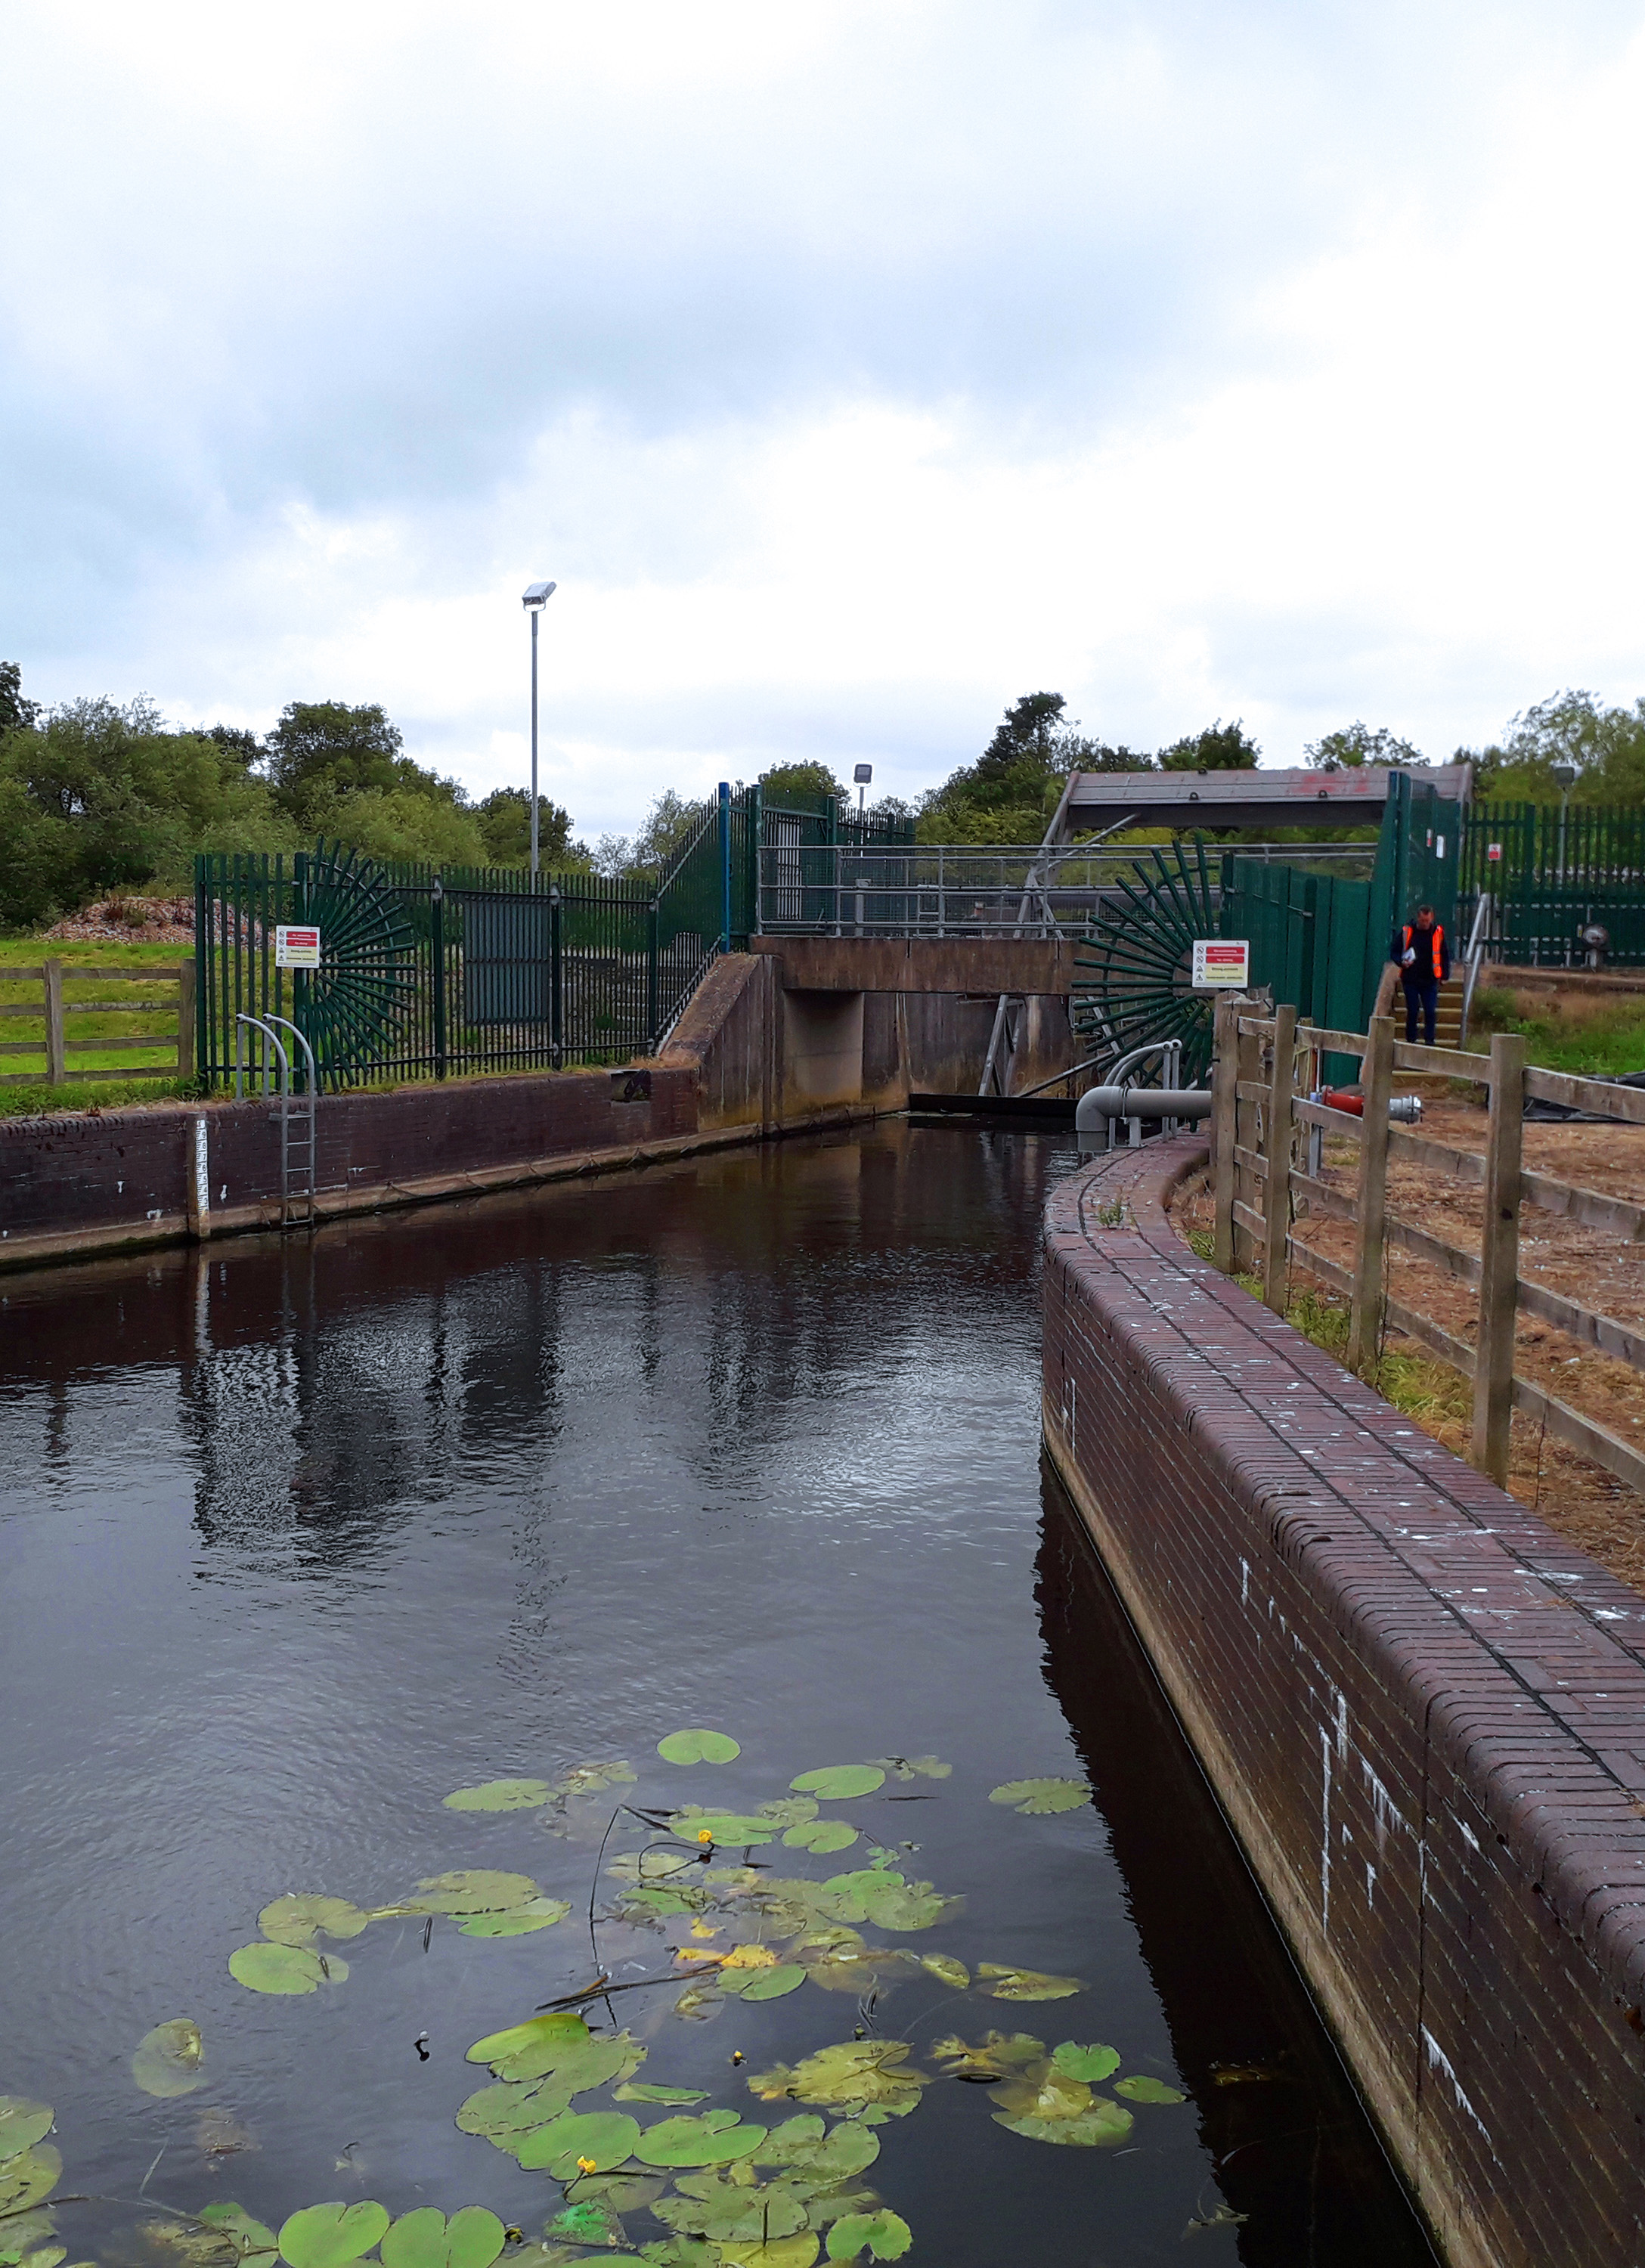 ECS has completed the overhaul of the radial gate at Pillings on the River Soar in Leicestershire